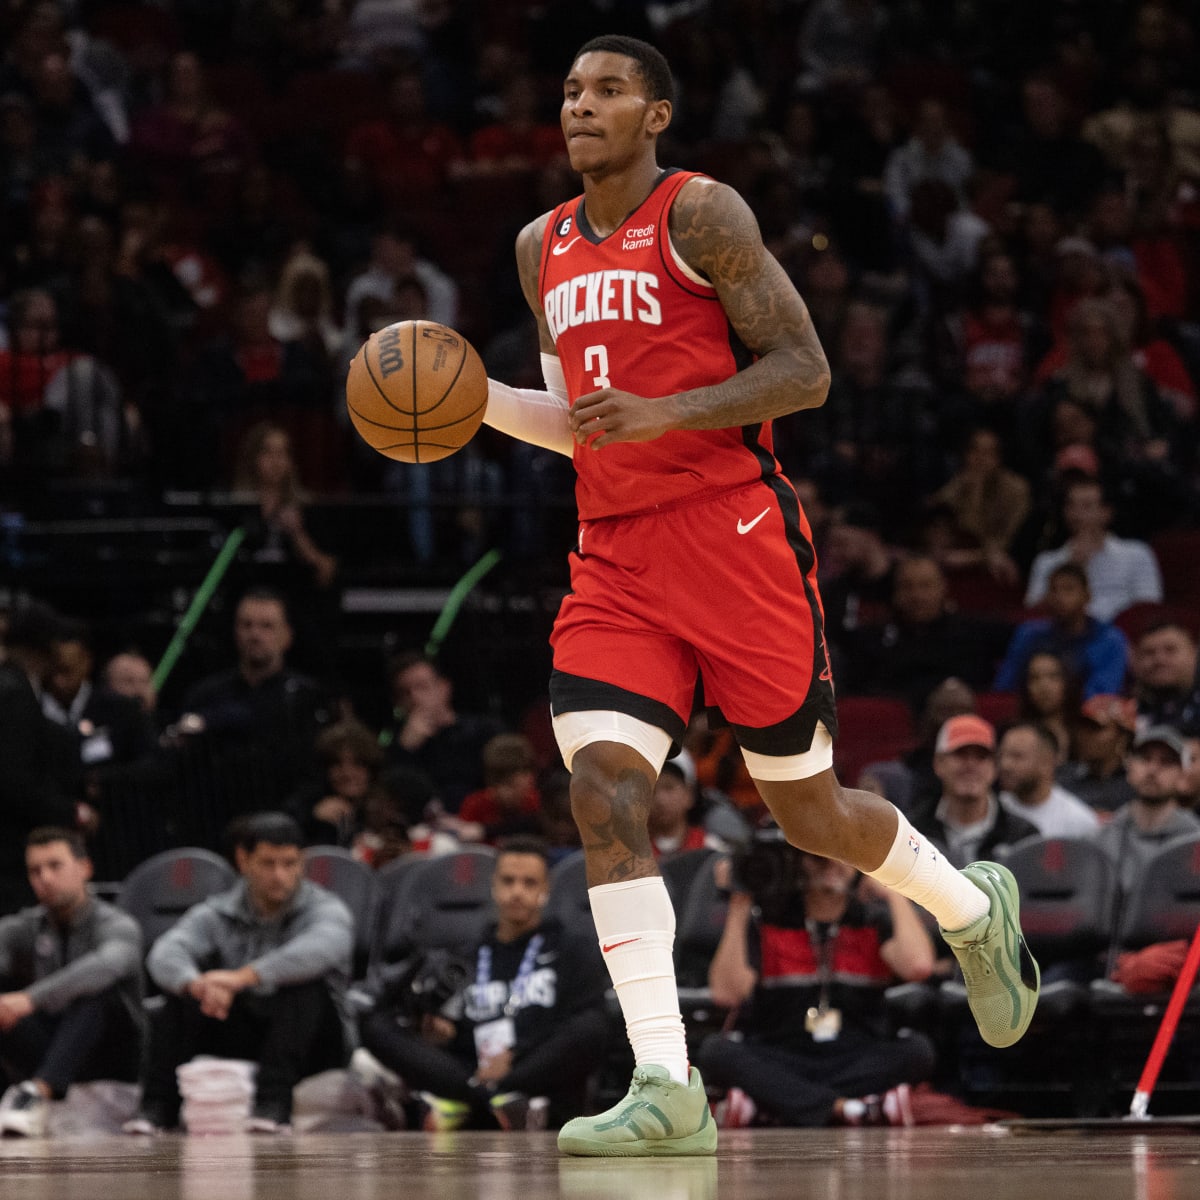 Kevin Porter Jr. returns from injury ahead of Rockets match